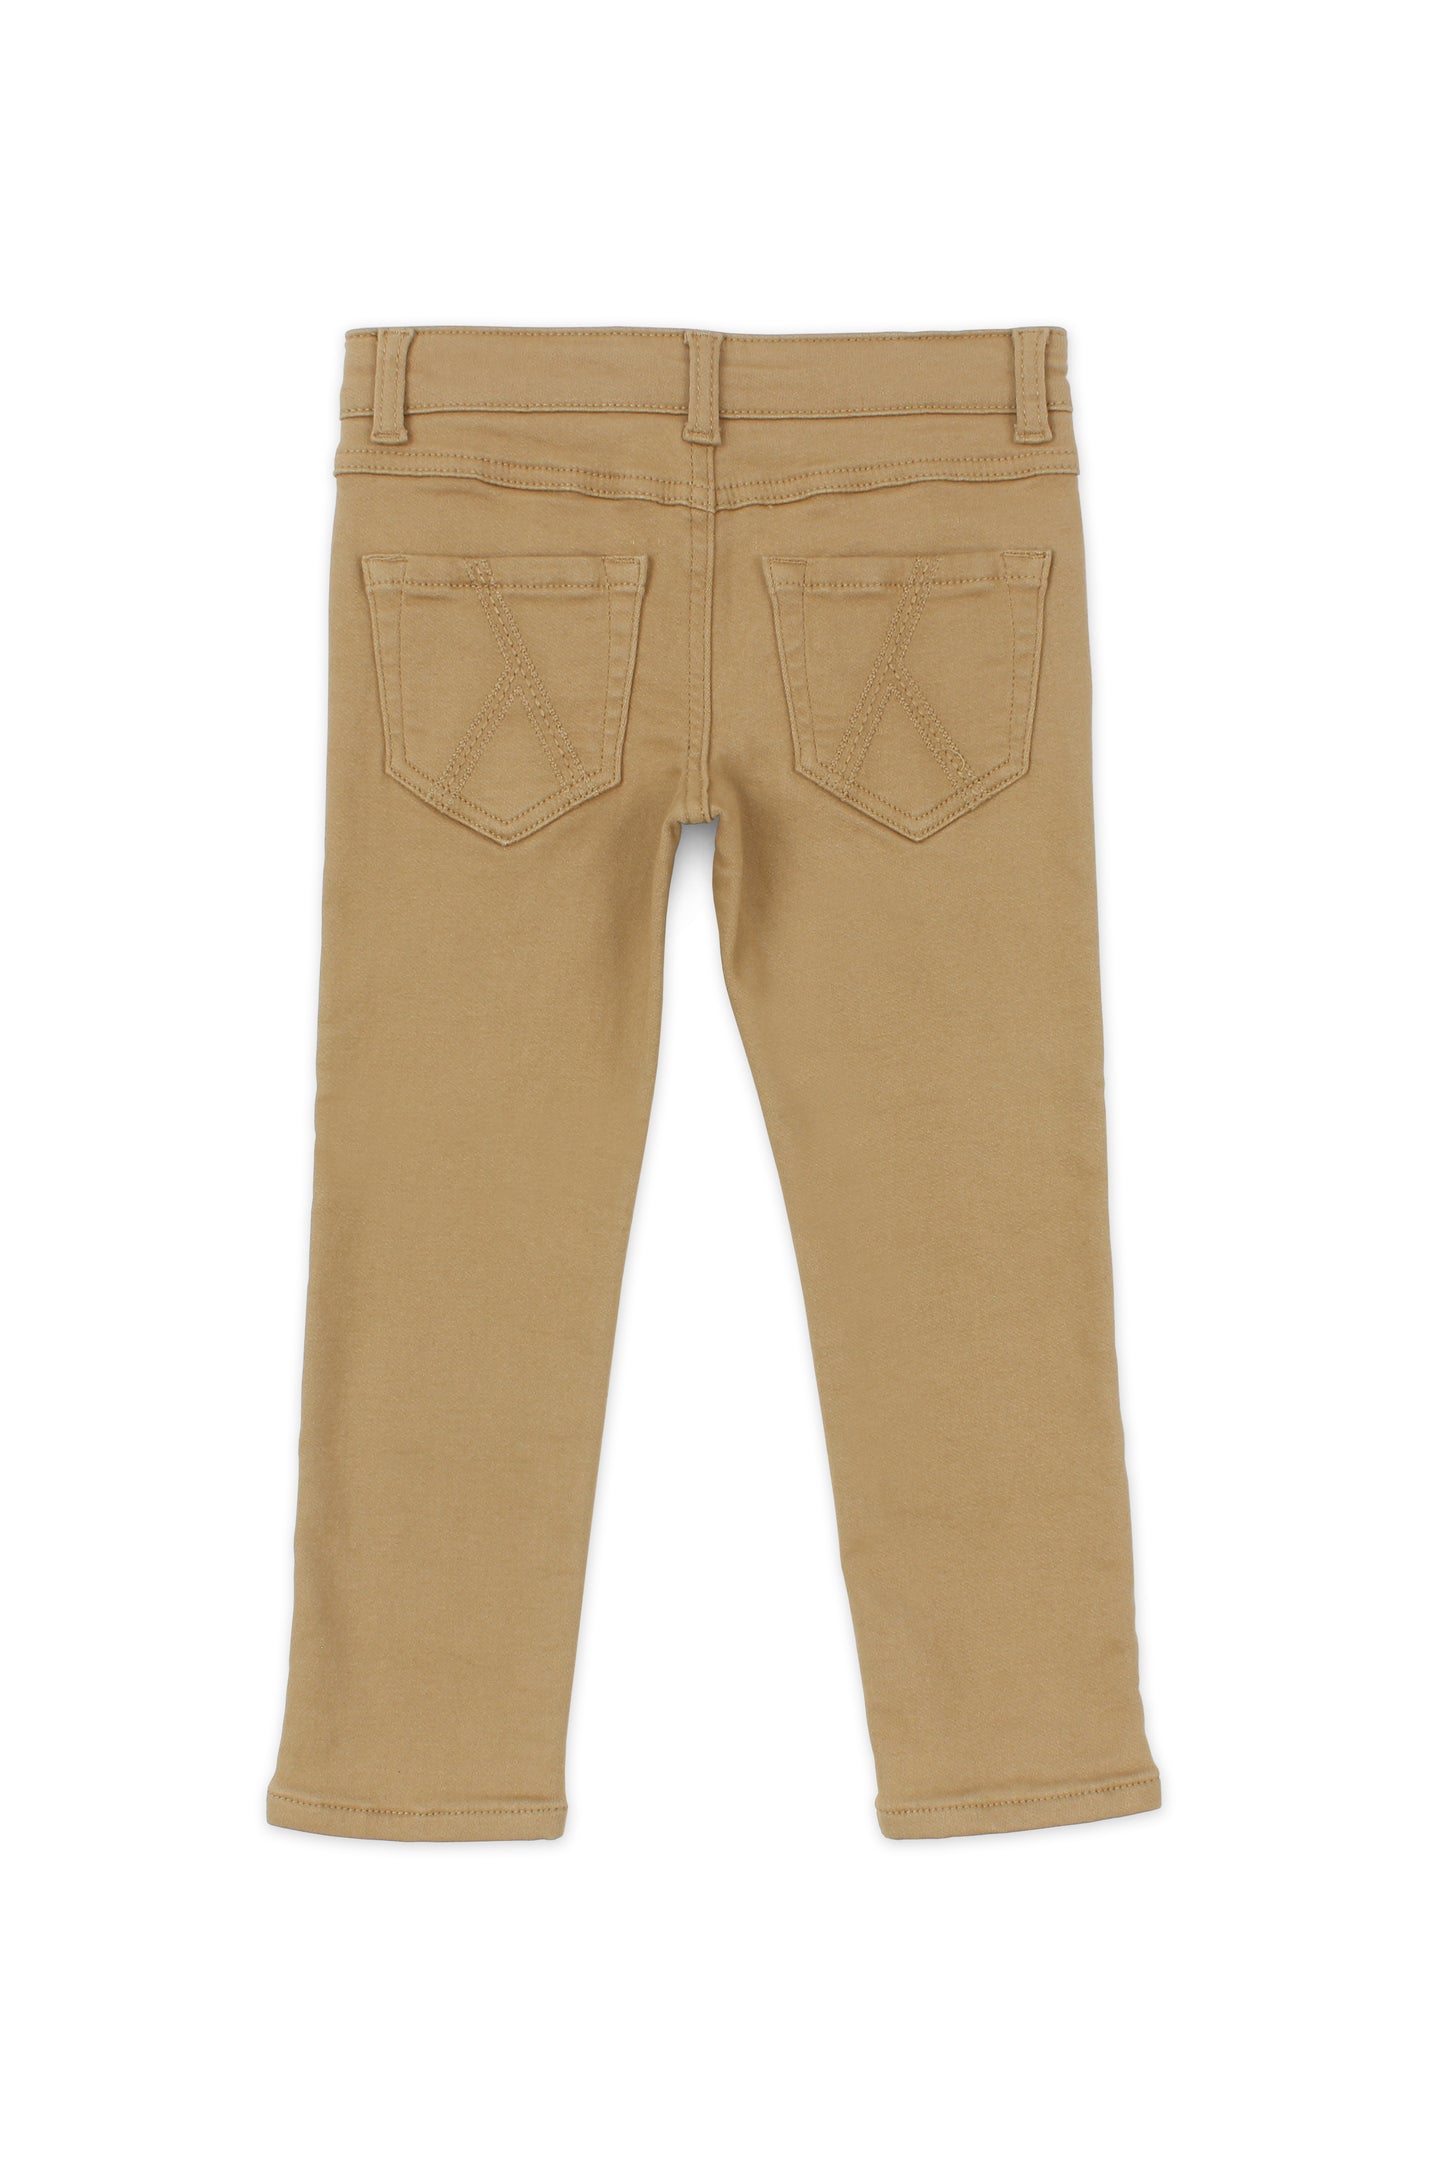 Romy&Aksel beige jeans for boys 2 to 8 years